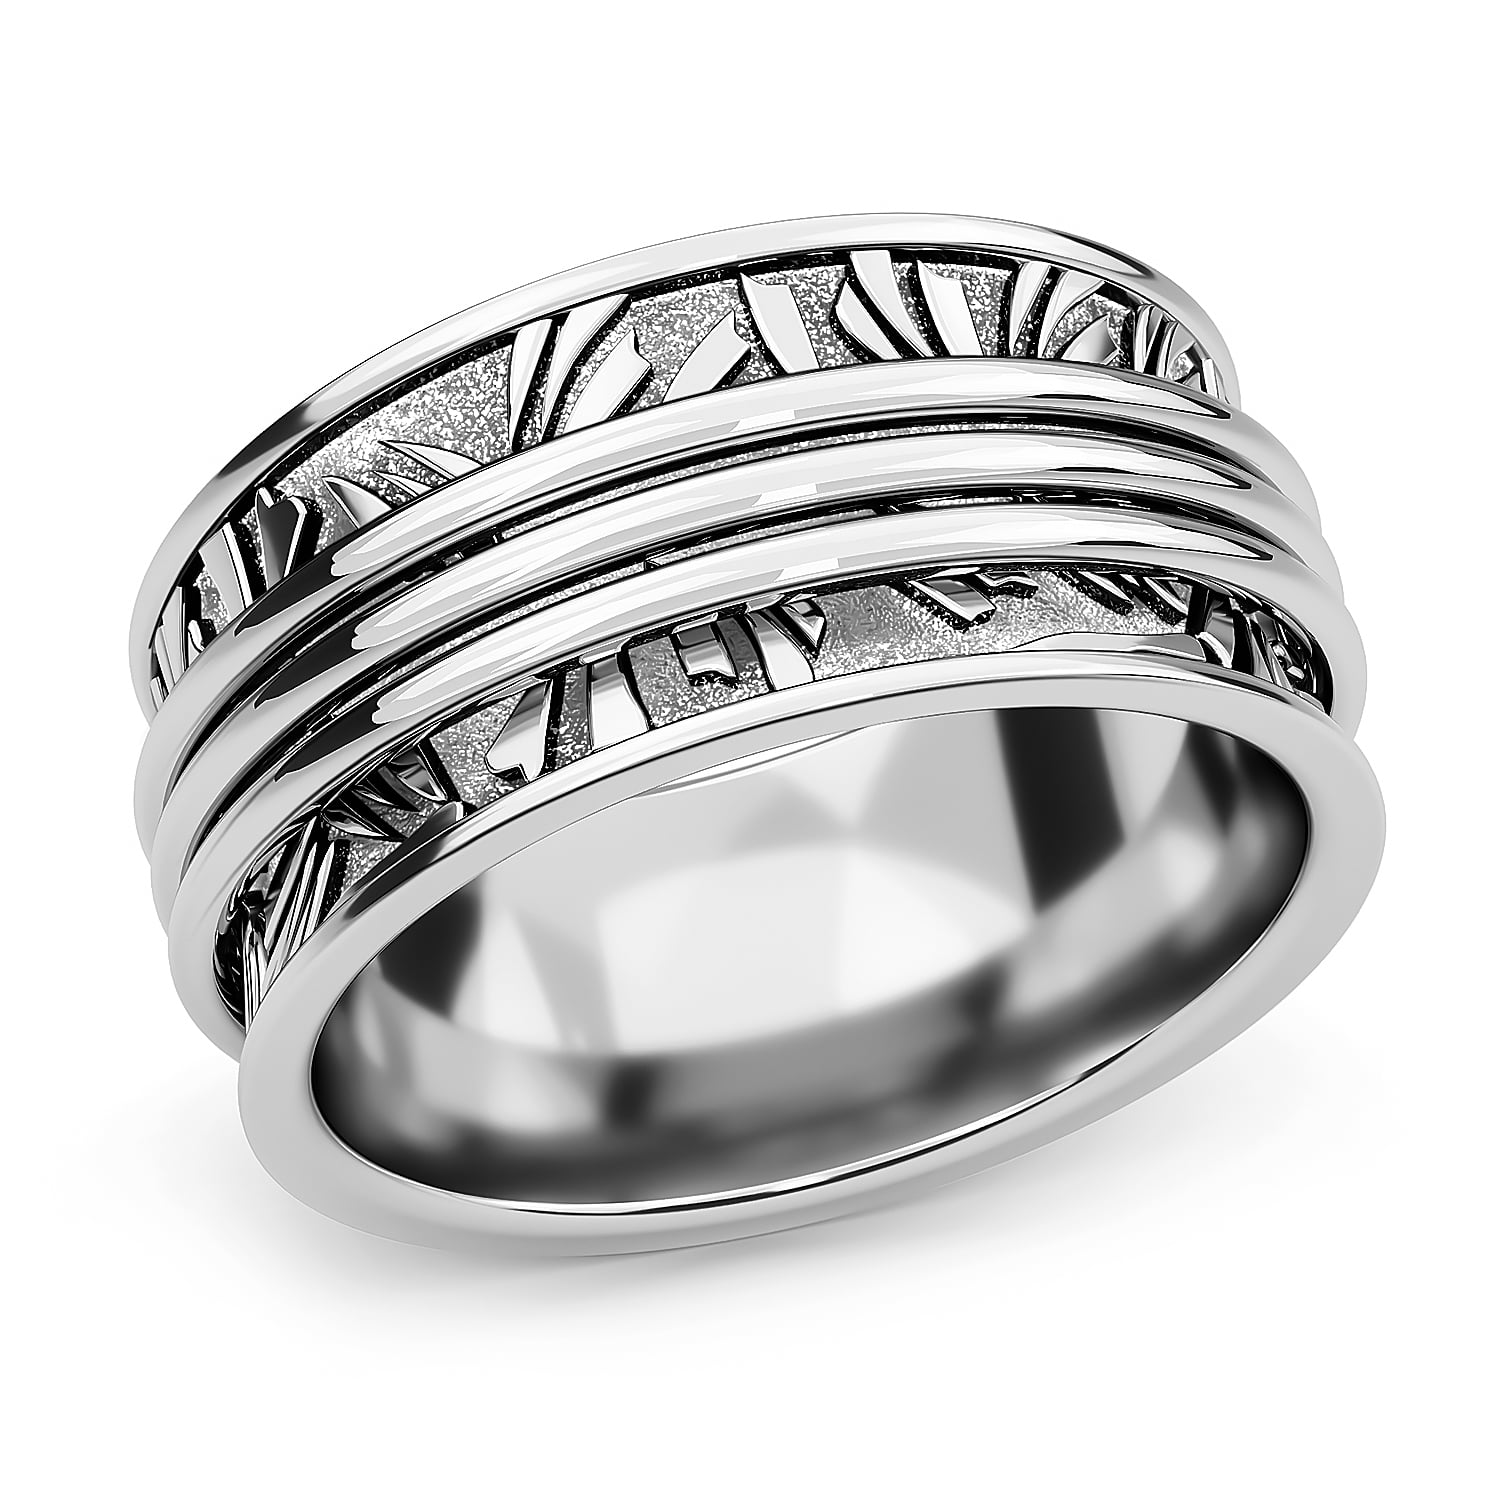 Family ring Organic ring Sterling silver ring Silver Spinner ring spinner band Statement ring Infinity Meditation ring Silver jewelry